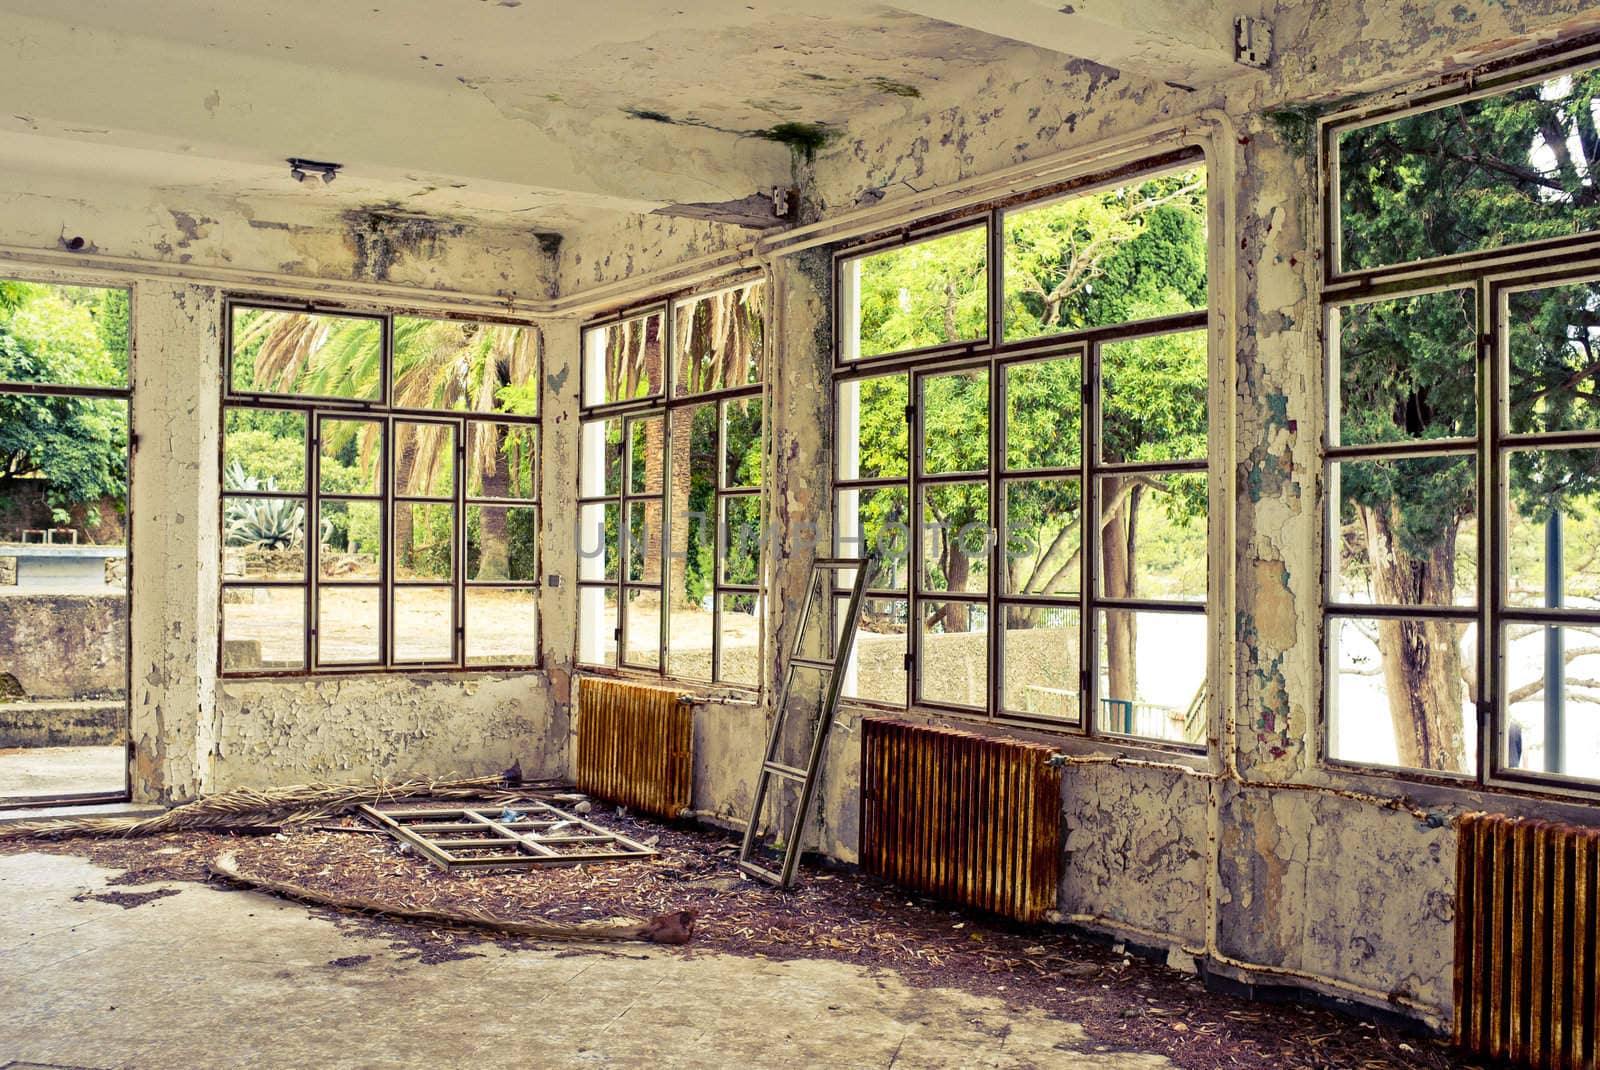 Interior abandoned home by ABCDK